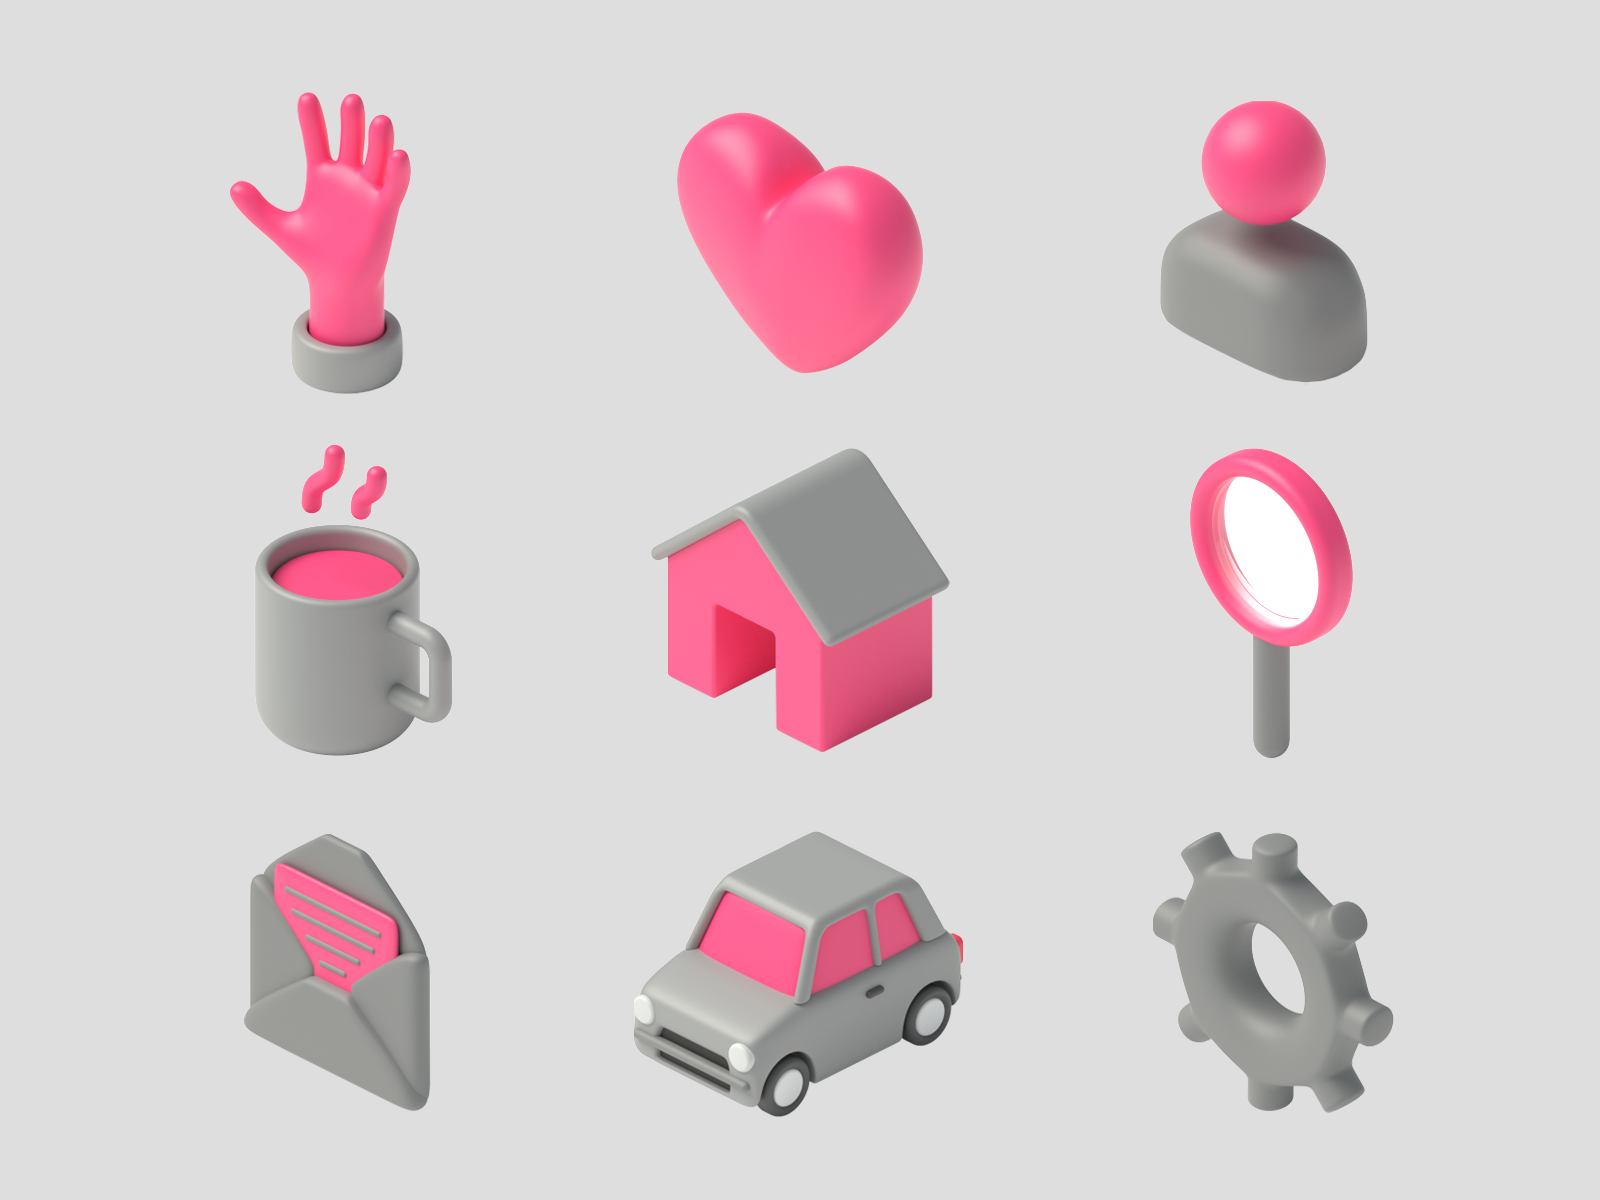 Dribbble - Untitled-1.png by Icons8.